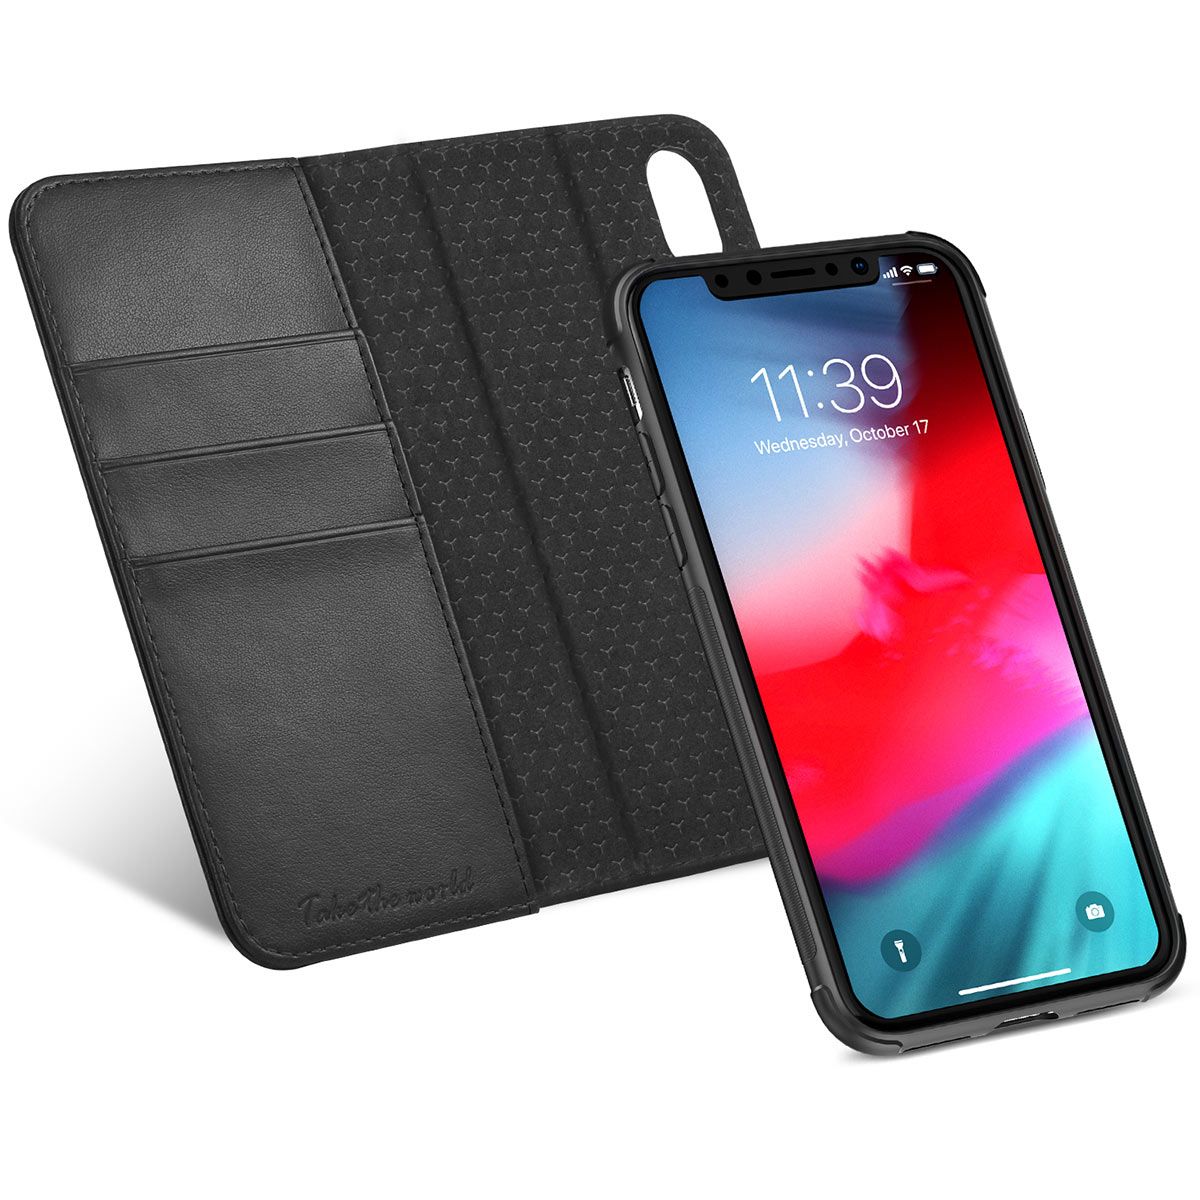 Tucch Iphone Xs Leather Wallet Case Iphone Xs Detachable Case 2in1 Folio Flip Cover With Rfid Blocking Kickstand Credit Card Slots Magnetic Closure Auto Sleep Wake Support Wireless Charging For Iphone 10s